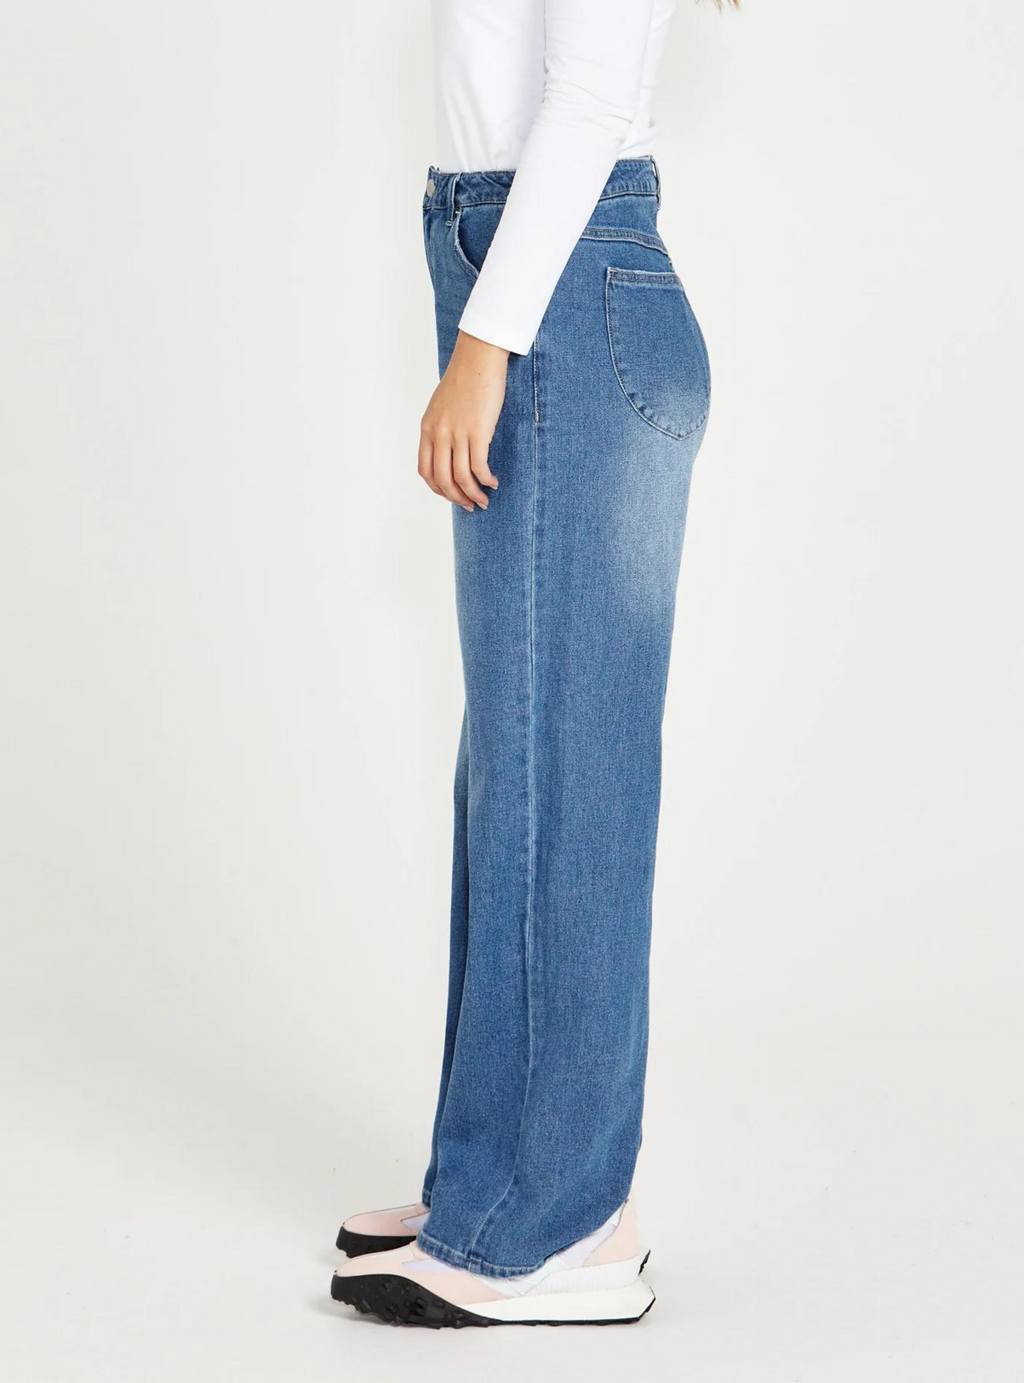 EMERALD HIGH WAISTED WIDE LEG JEANS - 80 Wash